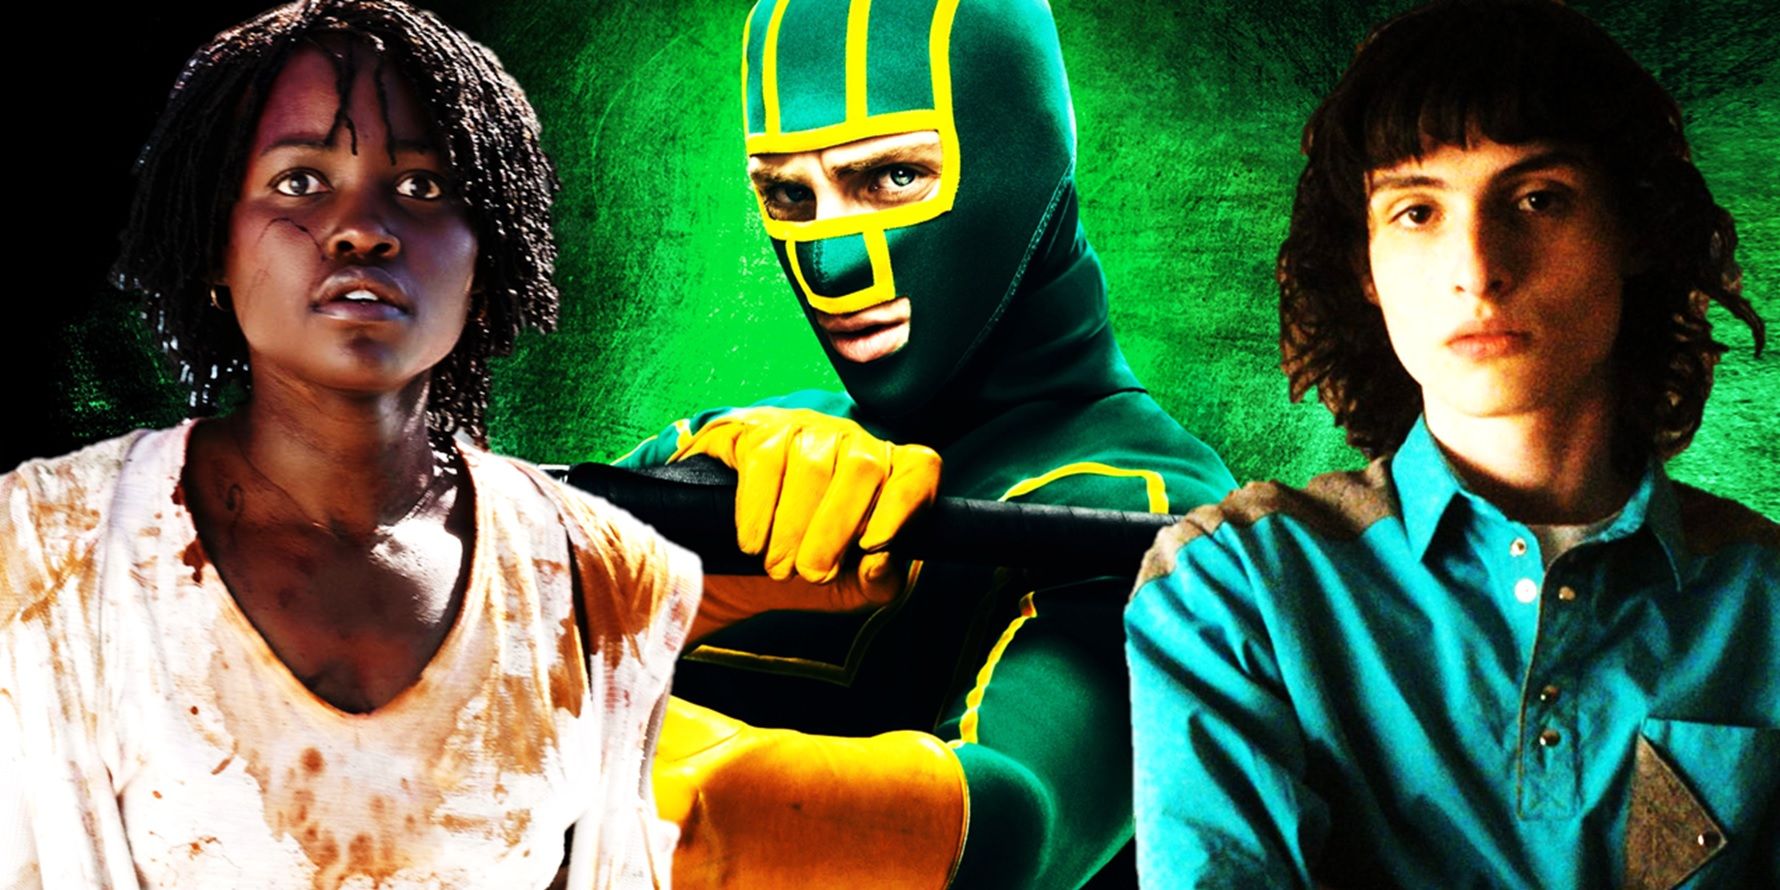 Collage of Lupita Nyong'o in Us, Aaron Taylor-Johnson in Kick-Ass, and Finn Wolfhard in Stranger Things